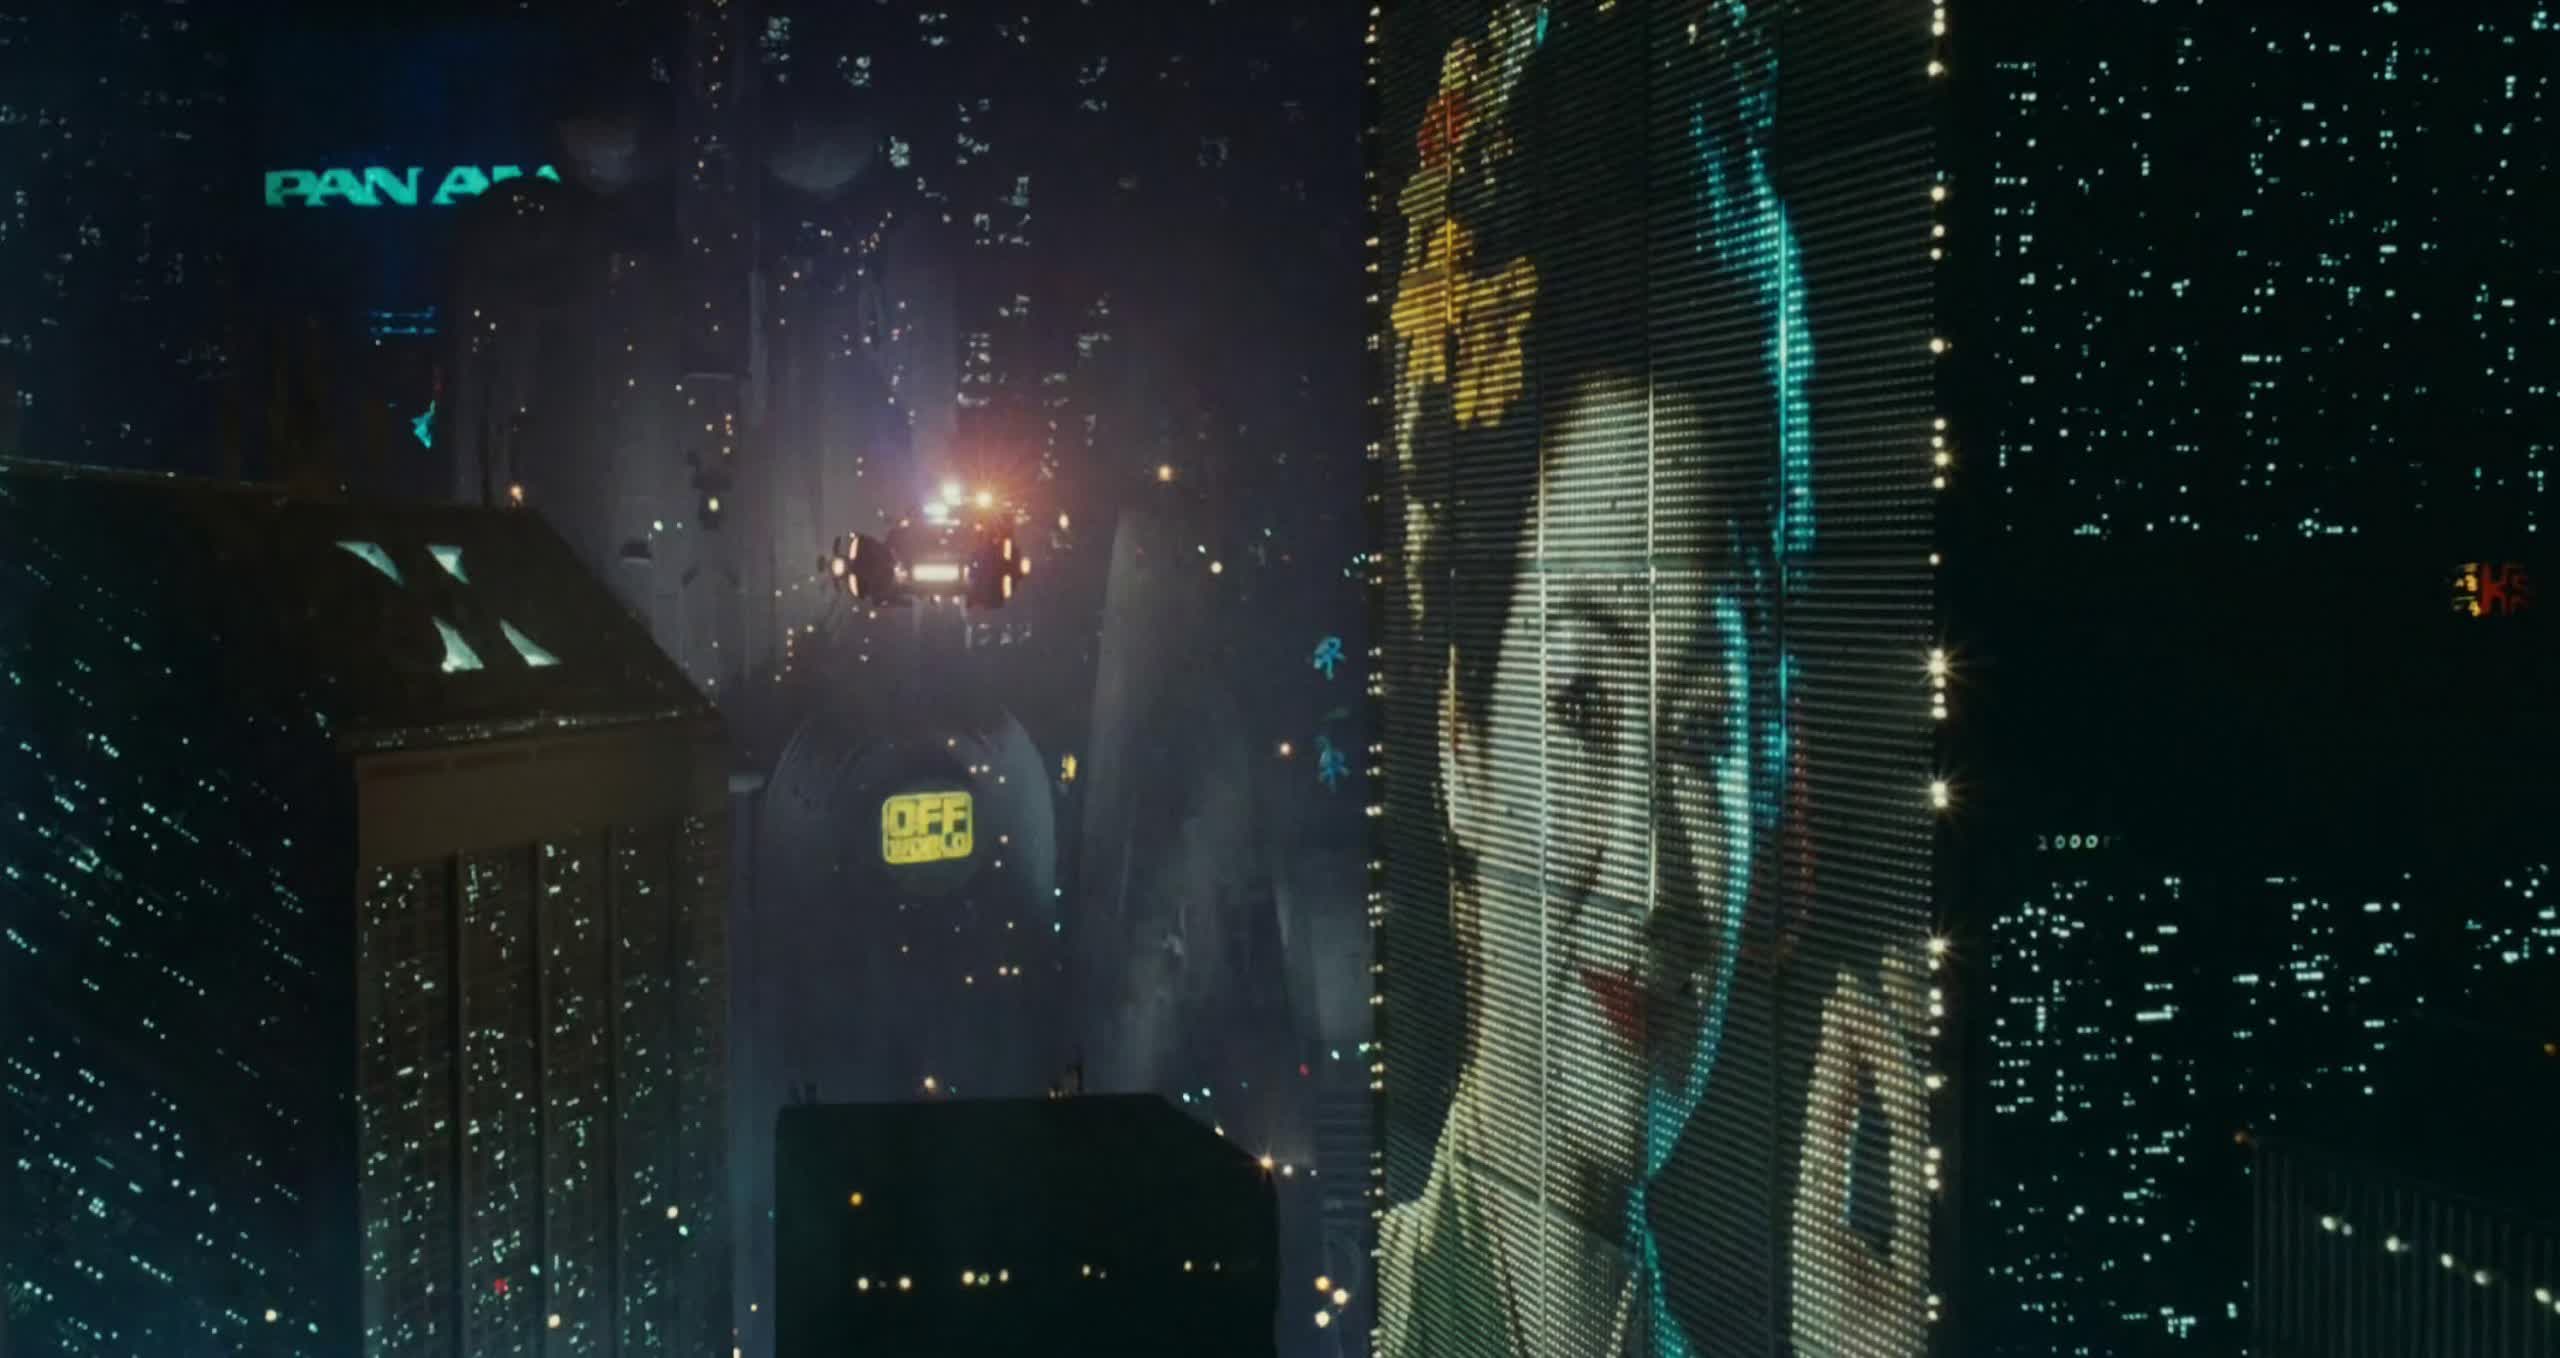 Ridley Scott confirms Blade Runner television series is in the works